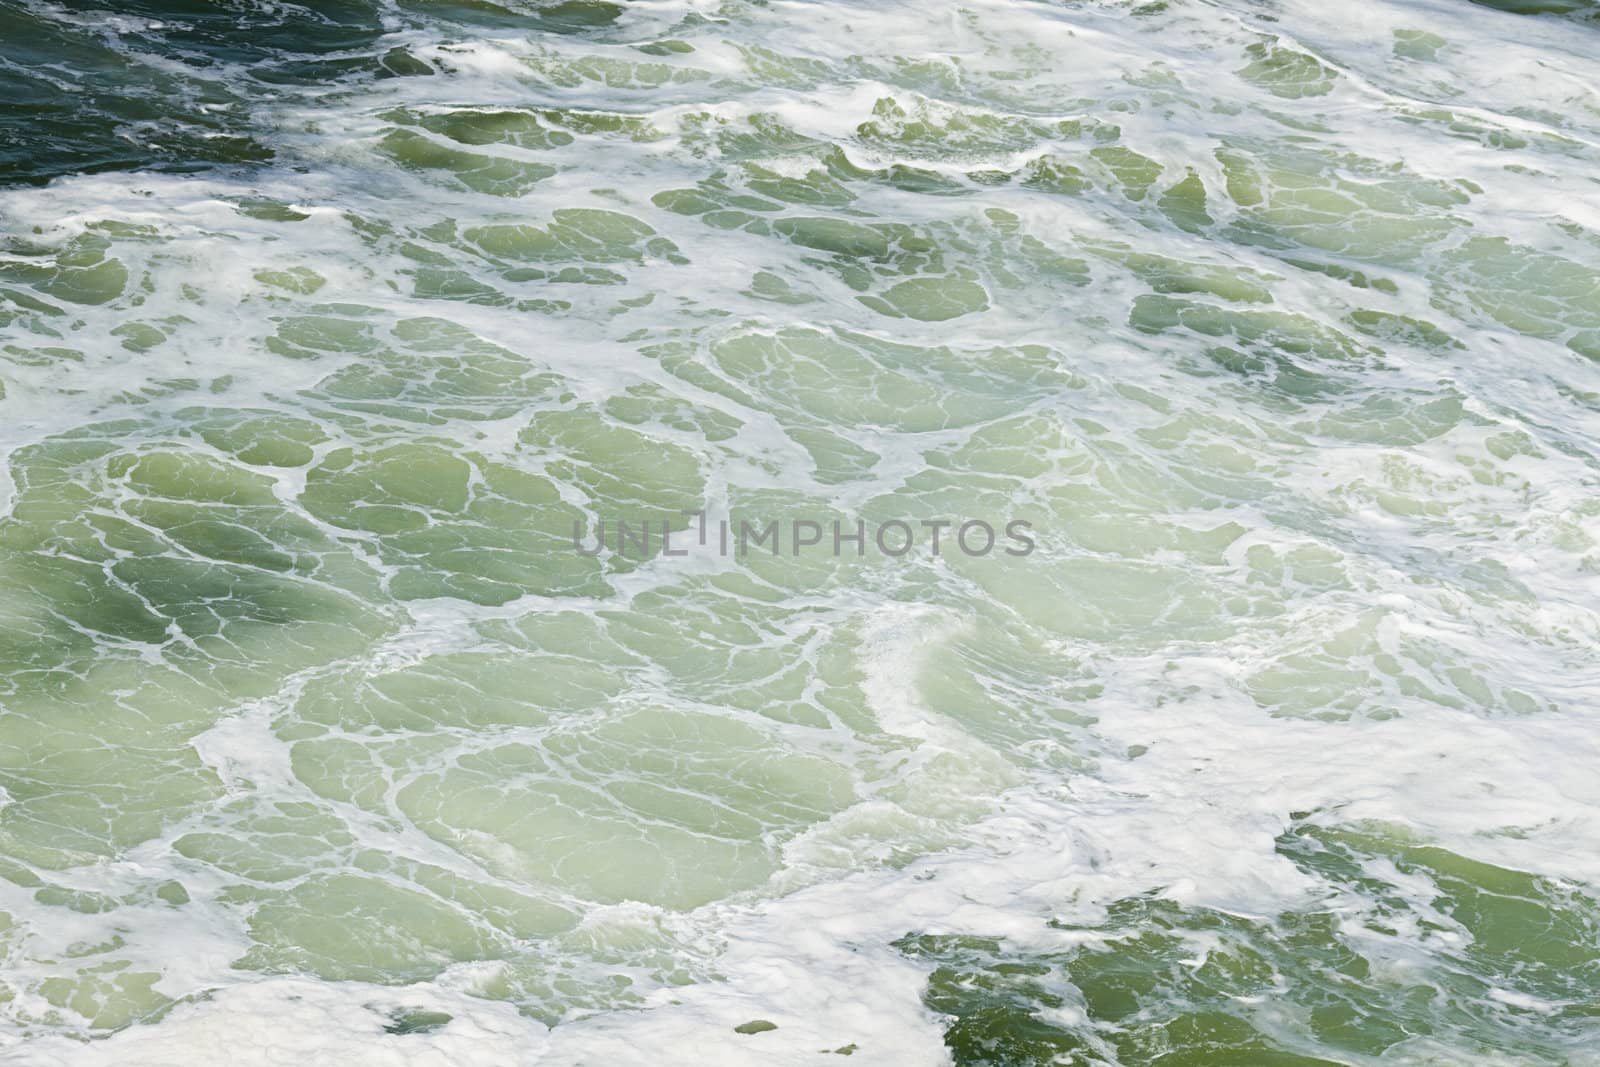 Foam on the water made by turning ship giving a light green color to the water